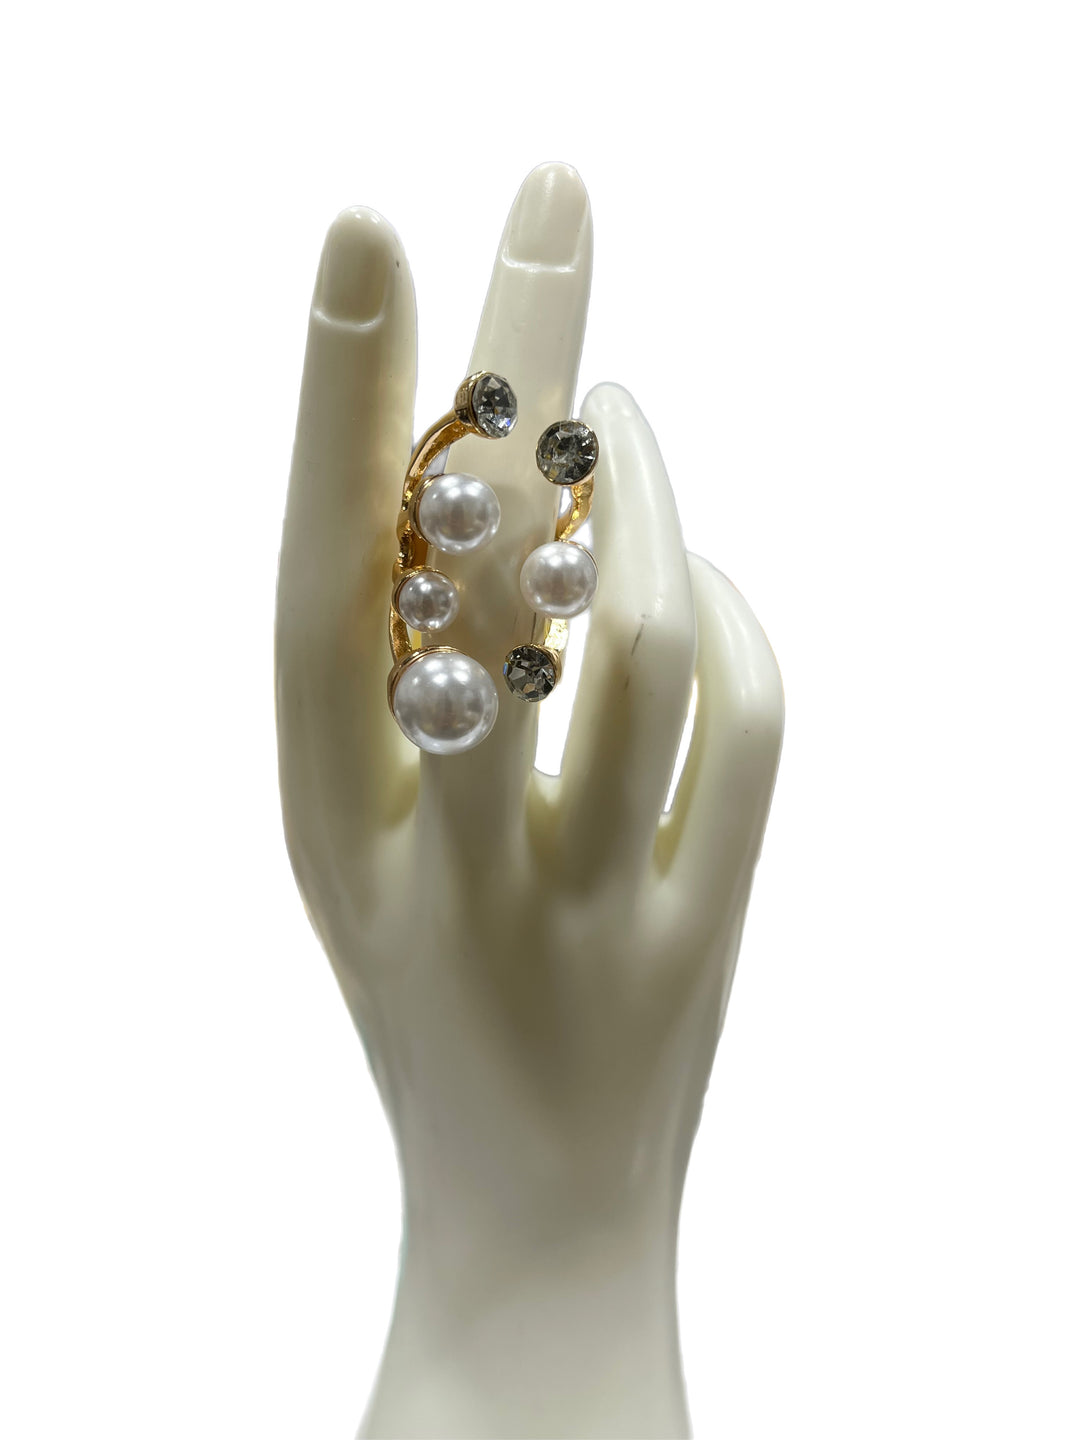 Your Highness Pearl statement ring